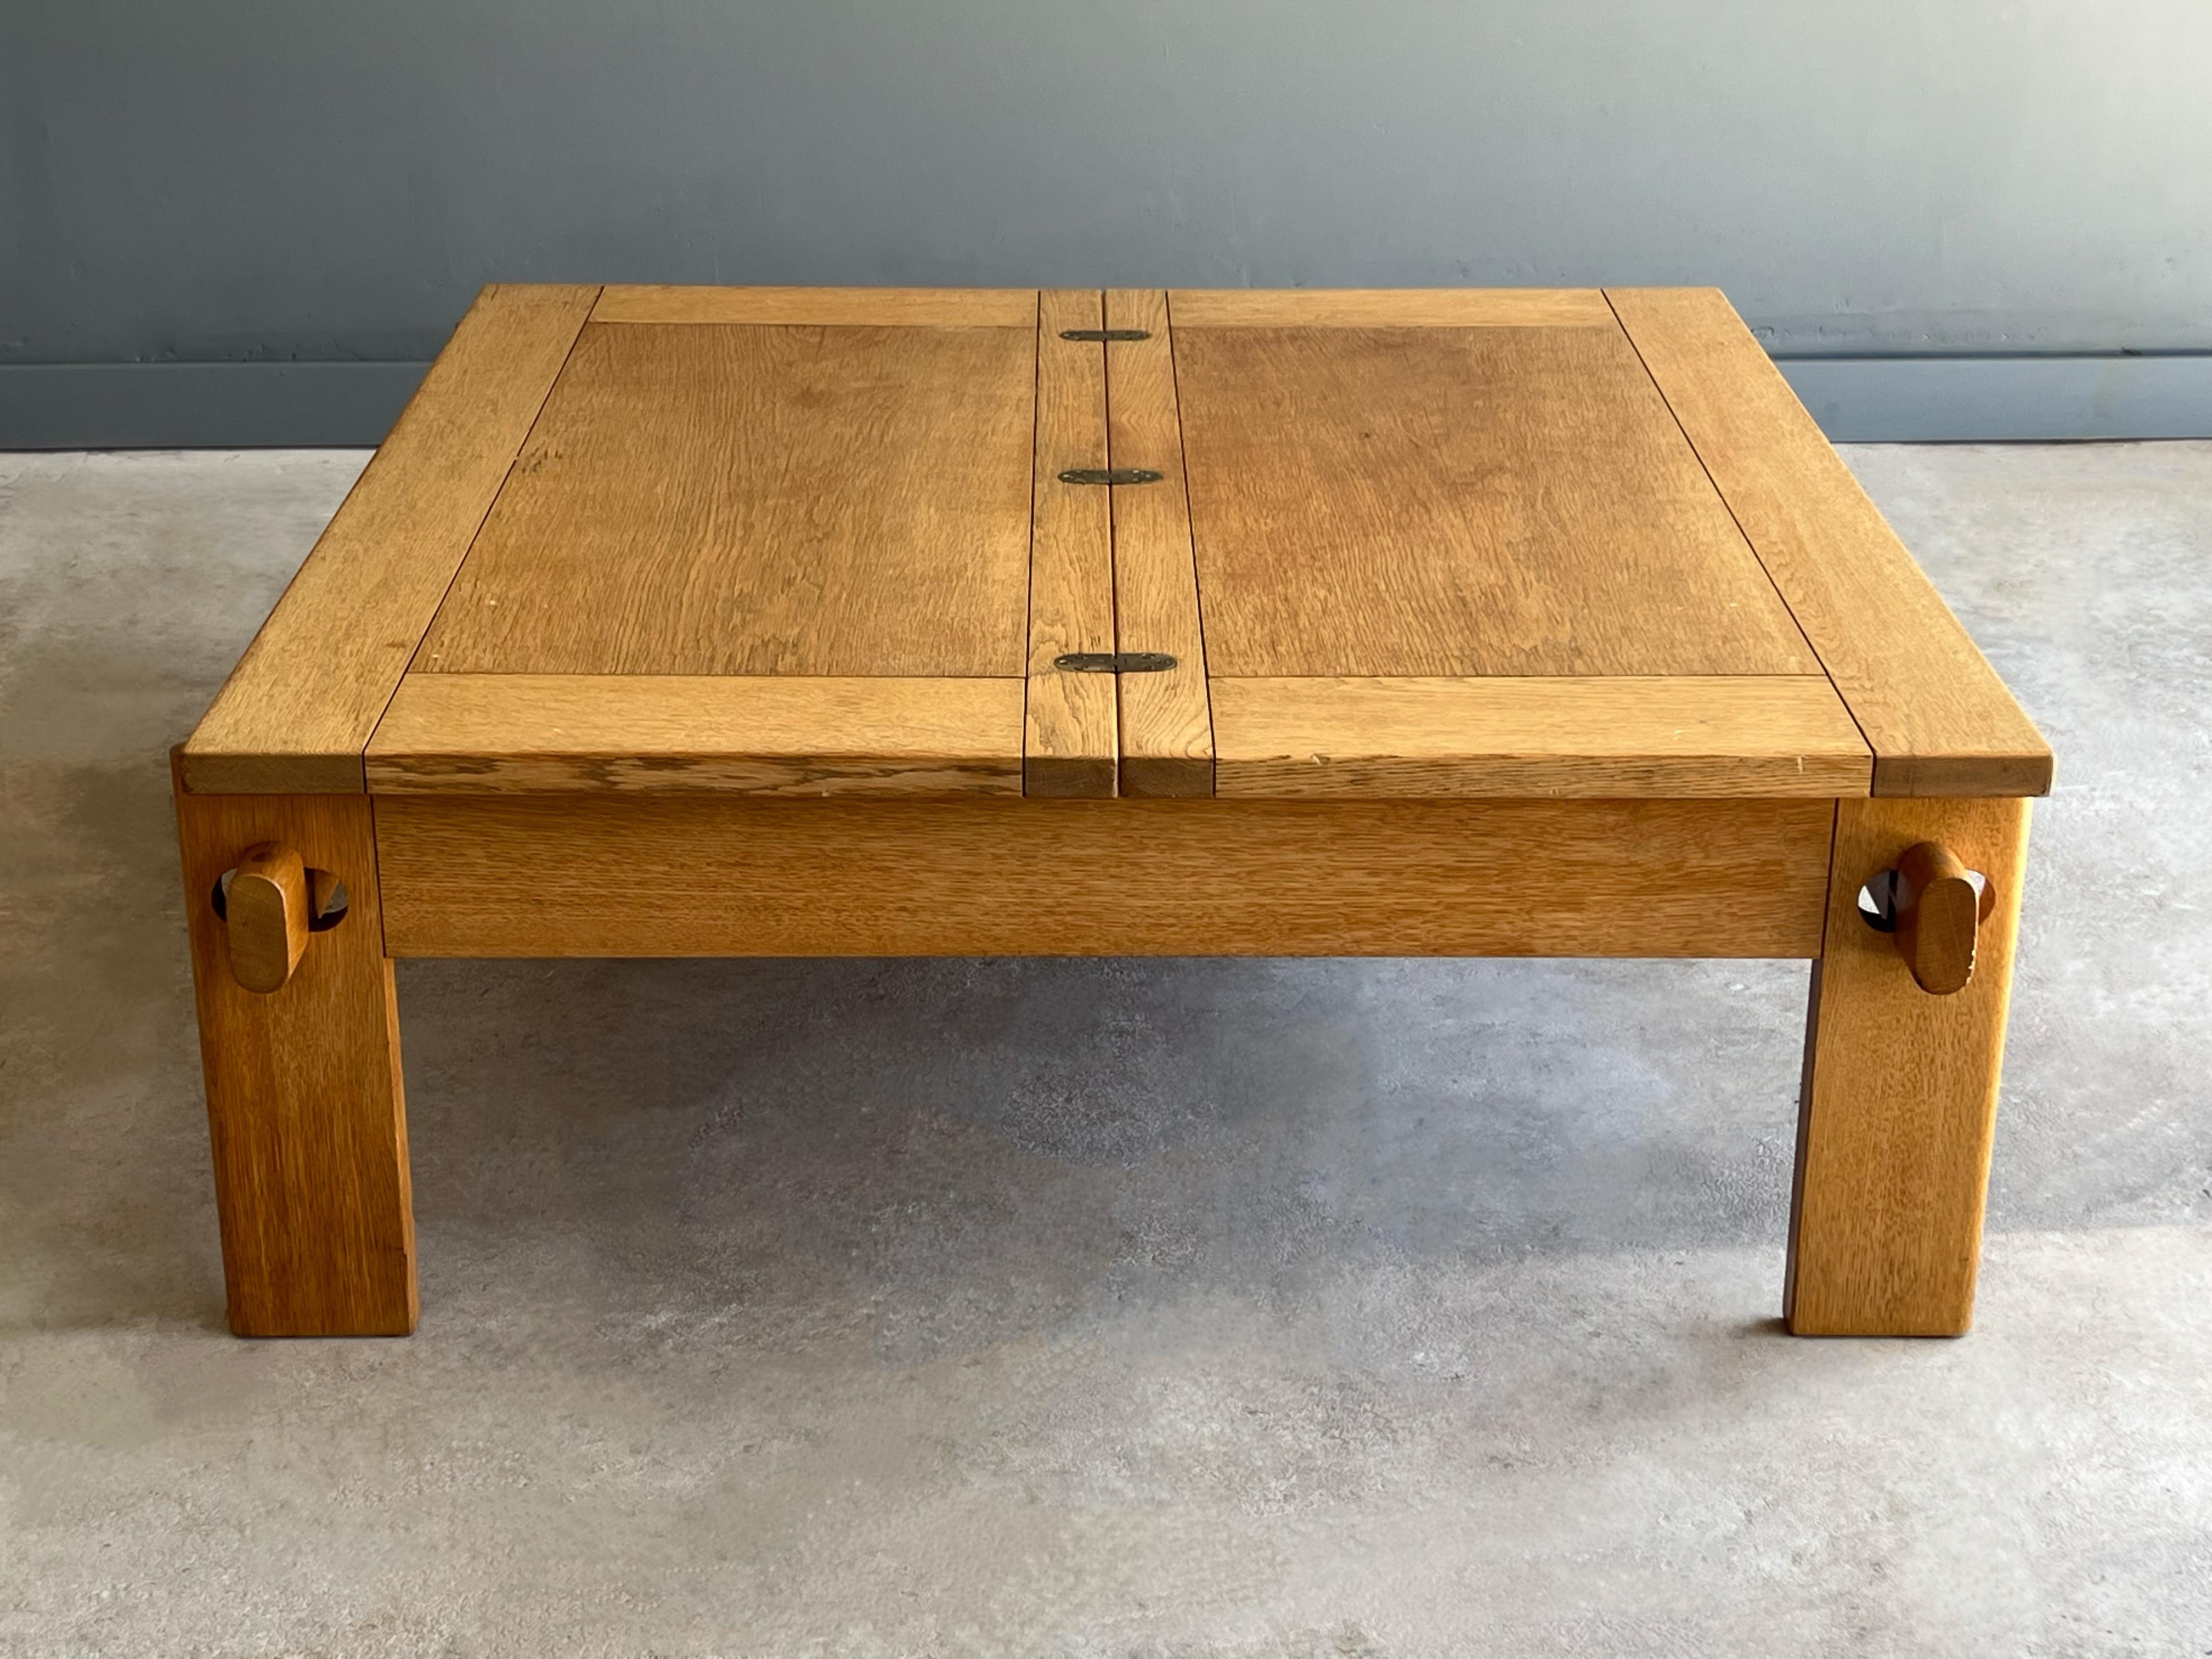 Uncommon Danish coffee table designed by Tage Poulsen, circa 1960s. This table is executed in quarter sawn white oak with brass detailing. Each leg fits into a grove creating a negative space and attractive joint that supports the folding top.